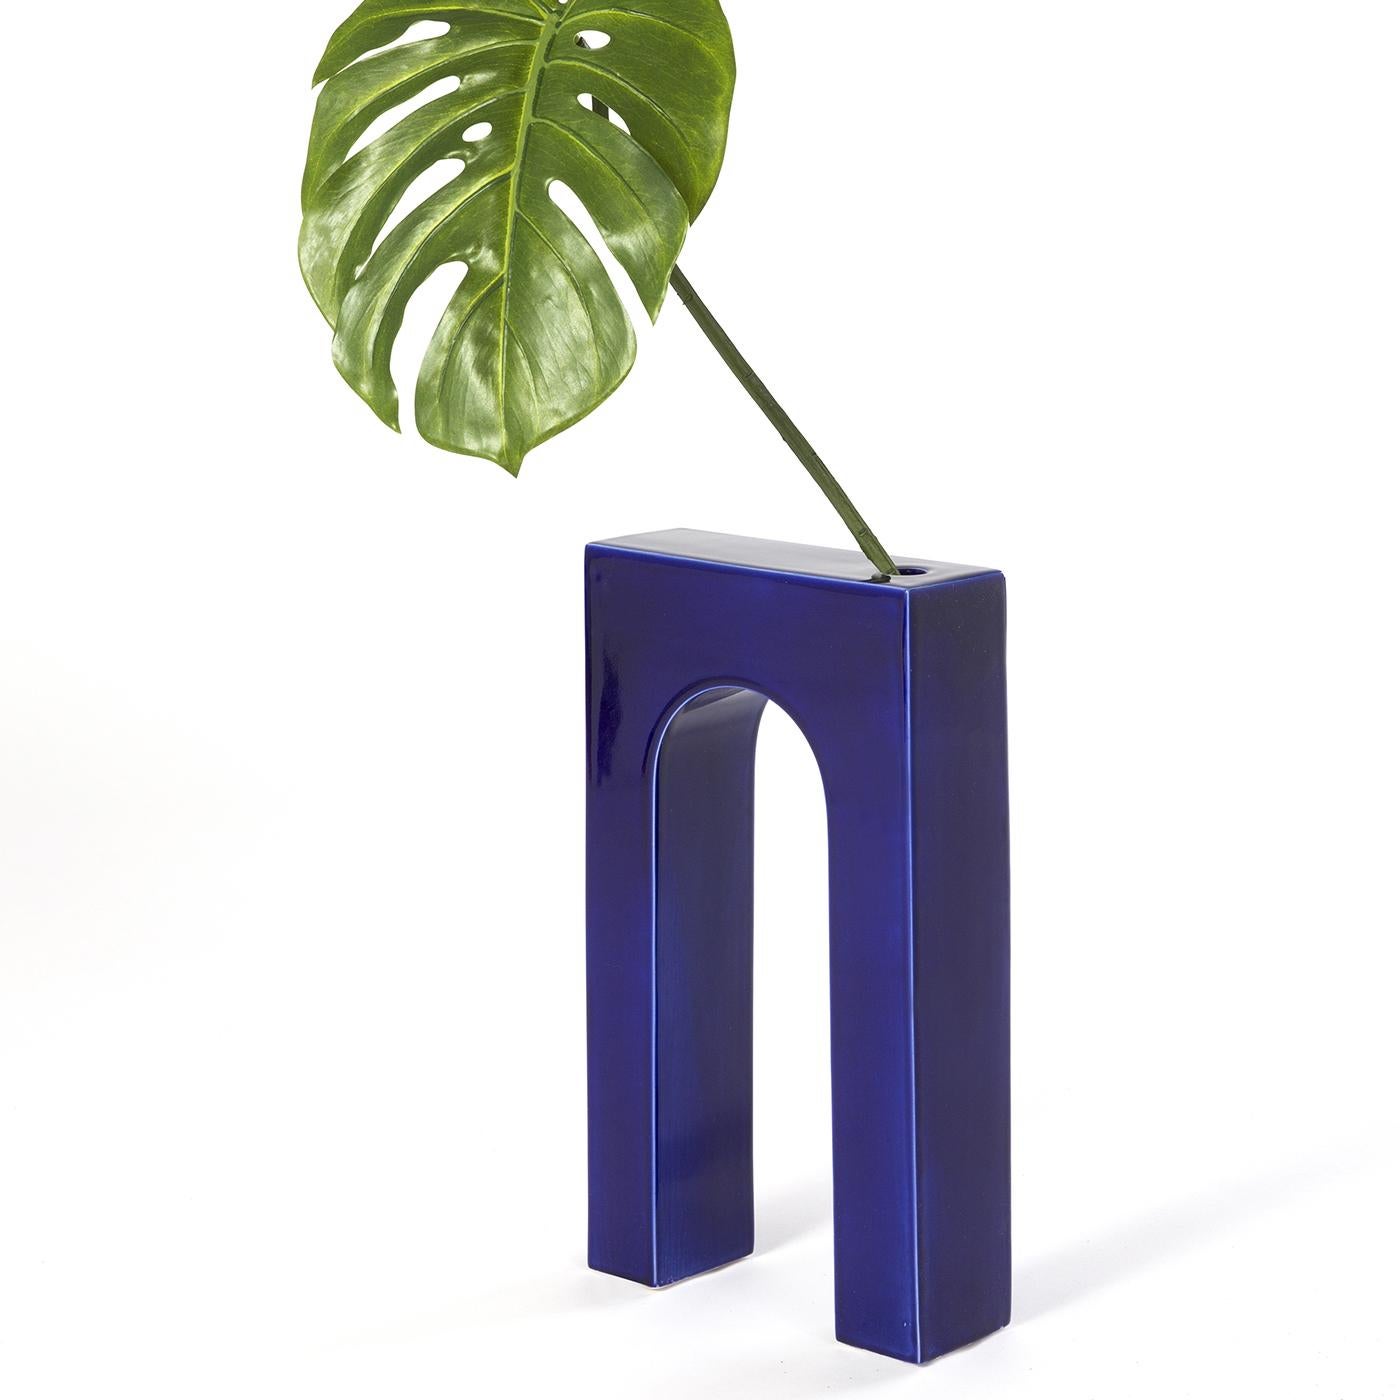 Entirely crafted of ceramic with a glossy blue finish, this vase is inspired by the metaphysical paintings by De Chirico. Its strong architectural presence and hypnotic allure create a stunning frame for floral decorations to place in the small hole